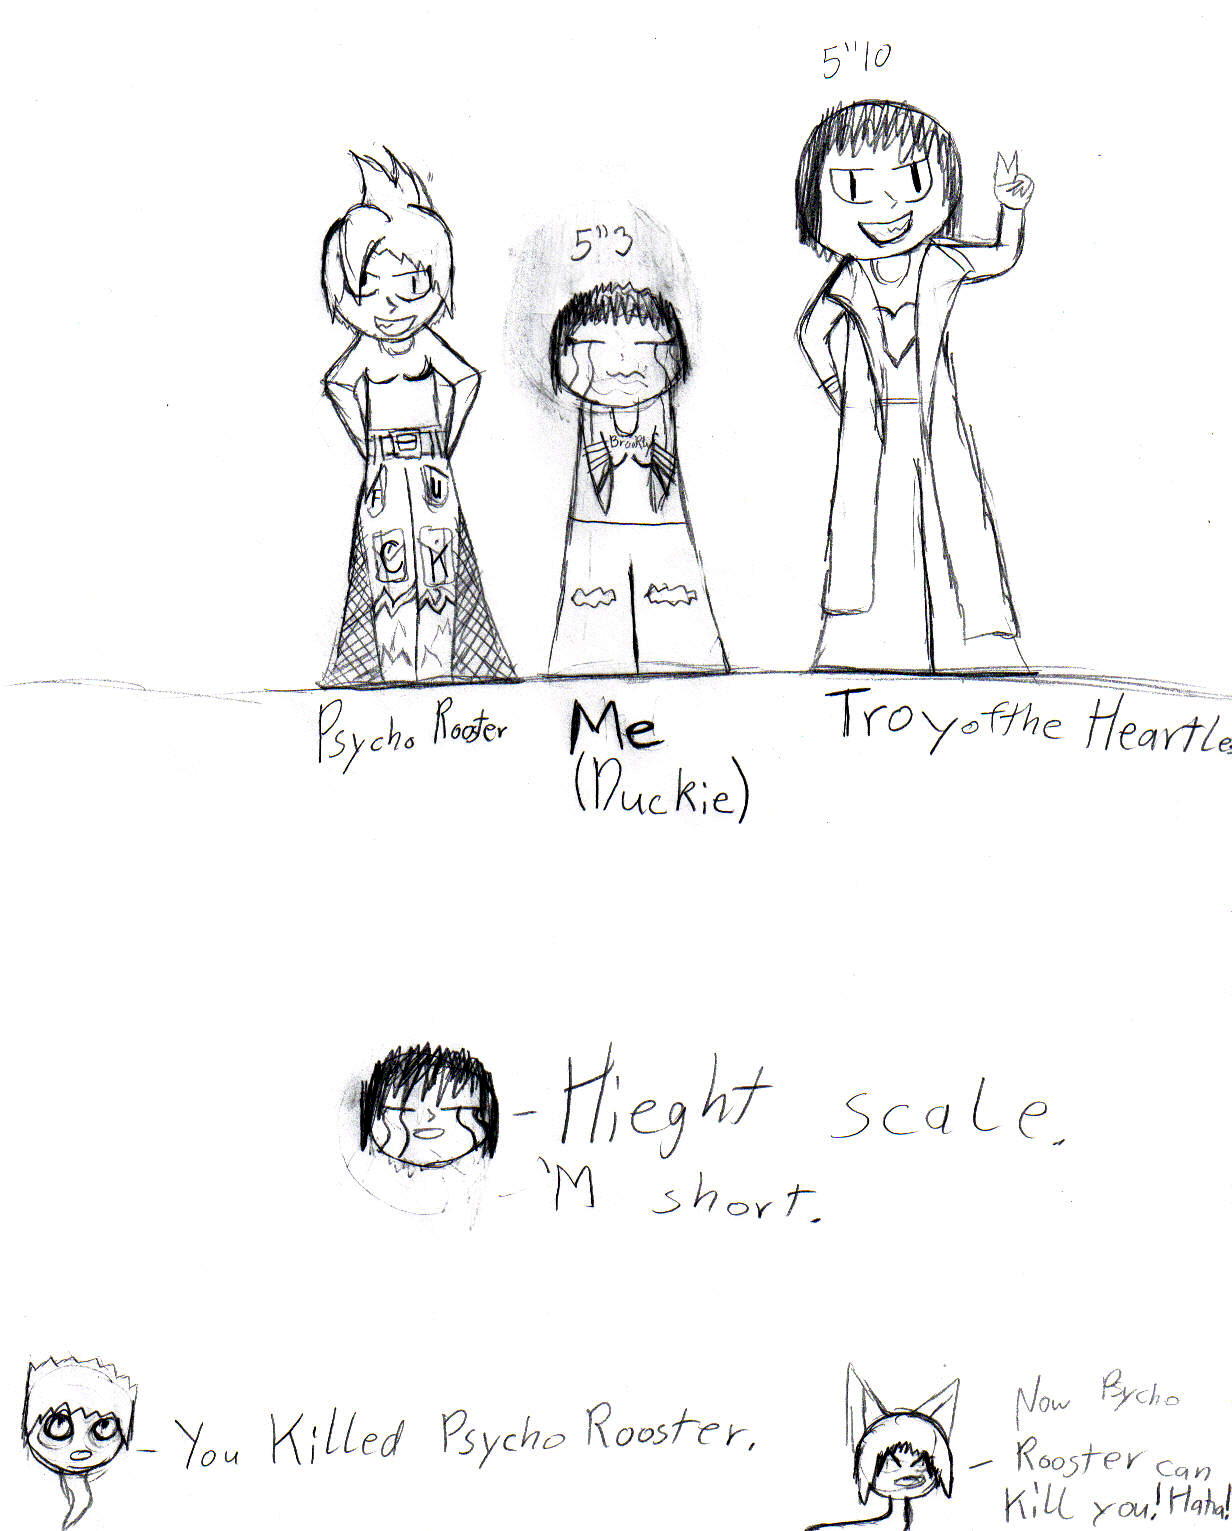 Hieght Scale by icemaidenKagome